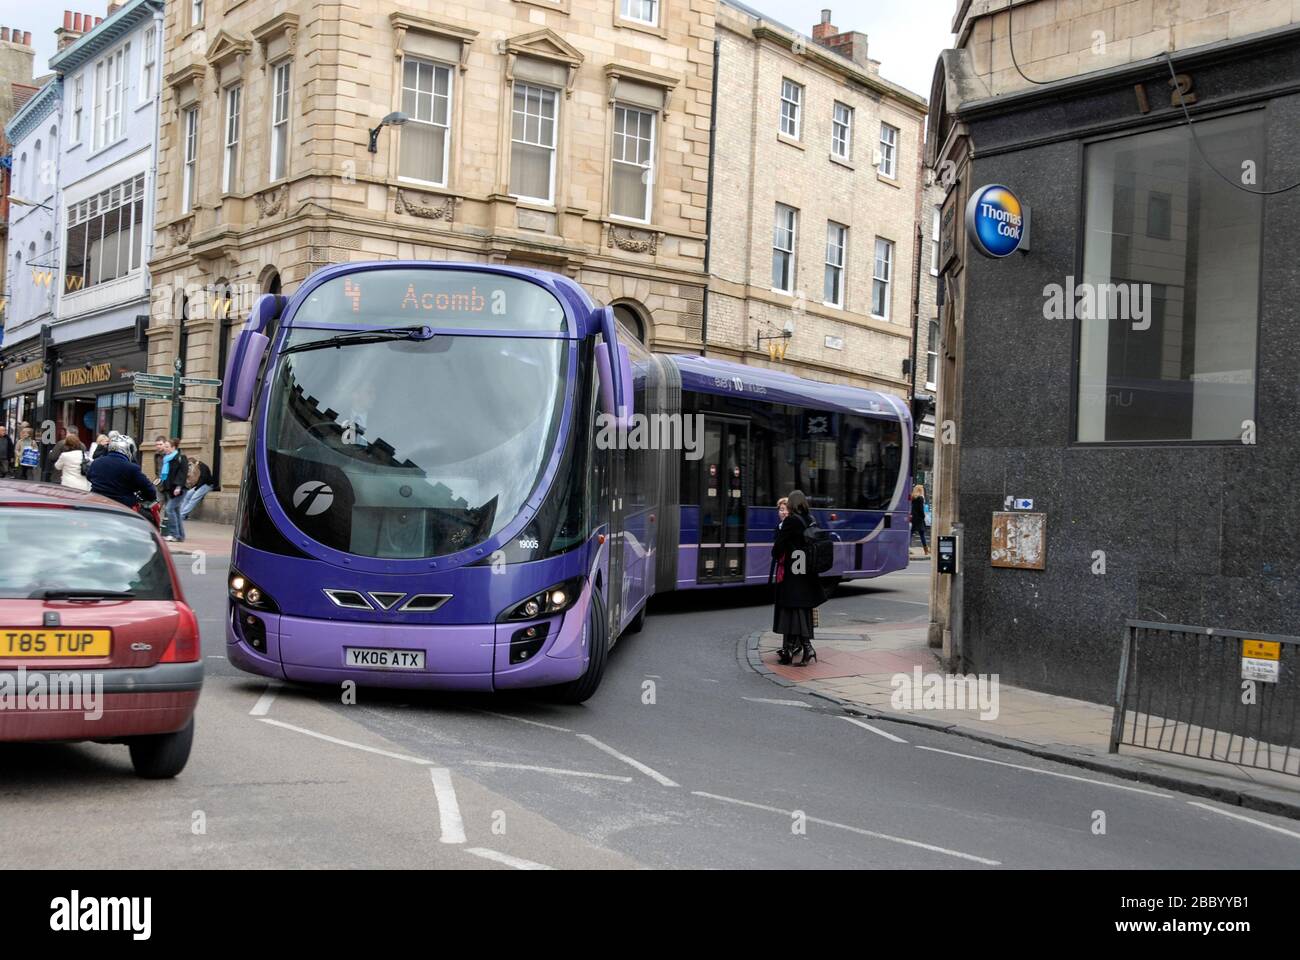 A Bendy bus in service in York, Yorkshire,England Stock Photo